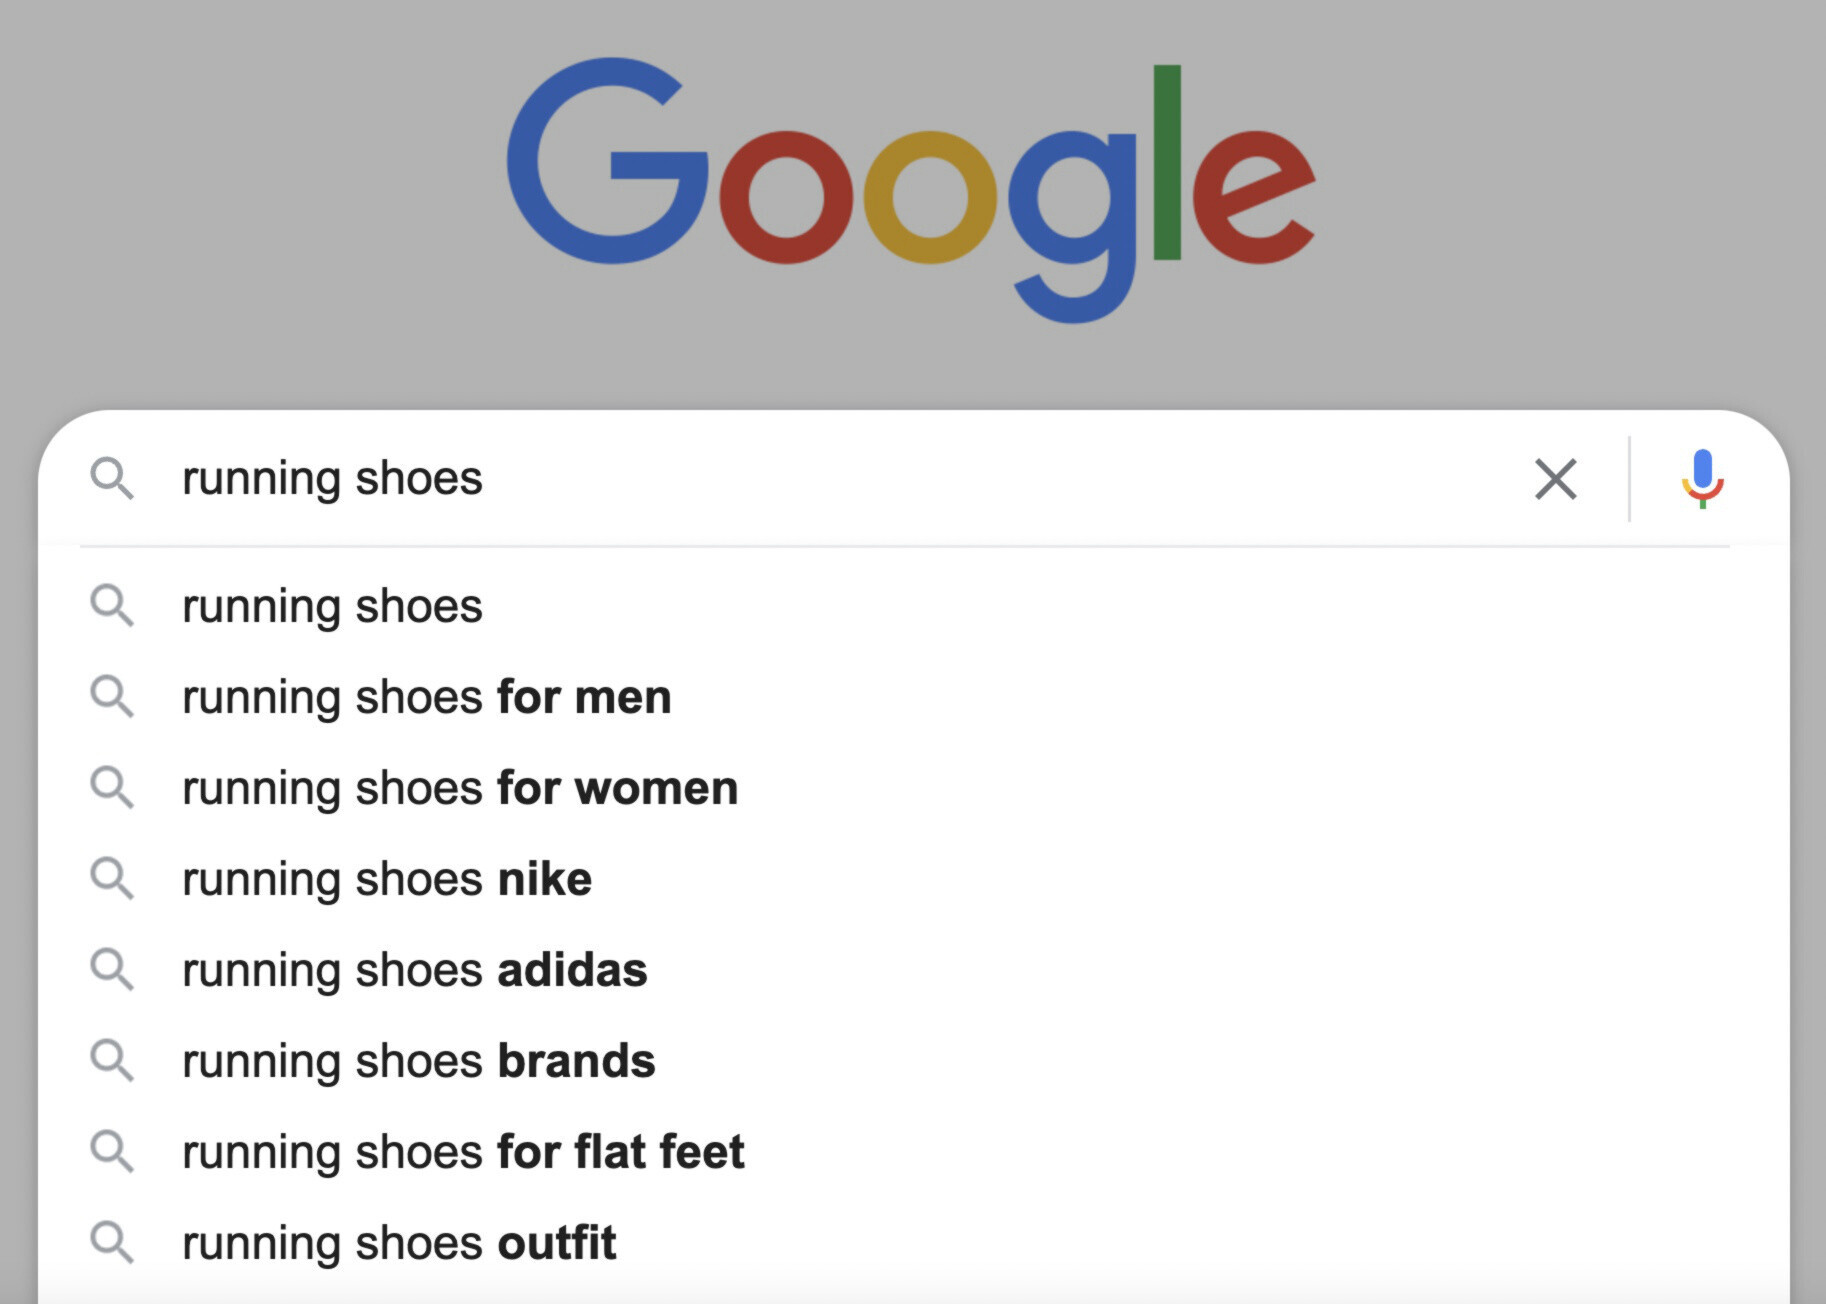 Google search suggestions for the keyword "running shoes"